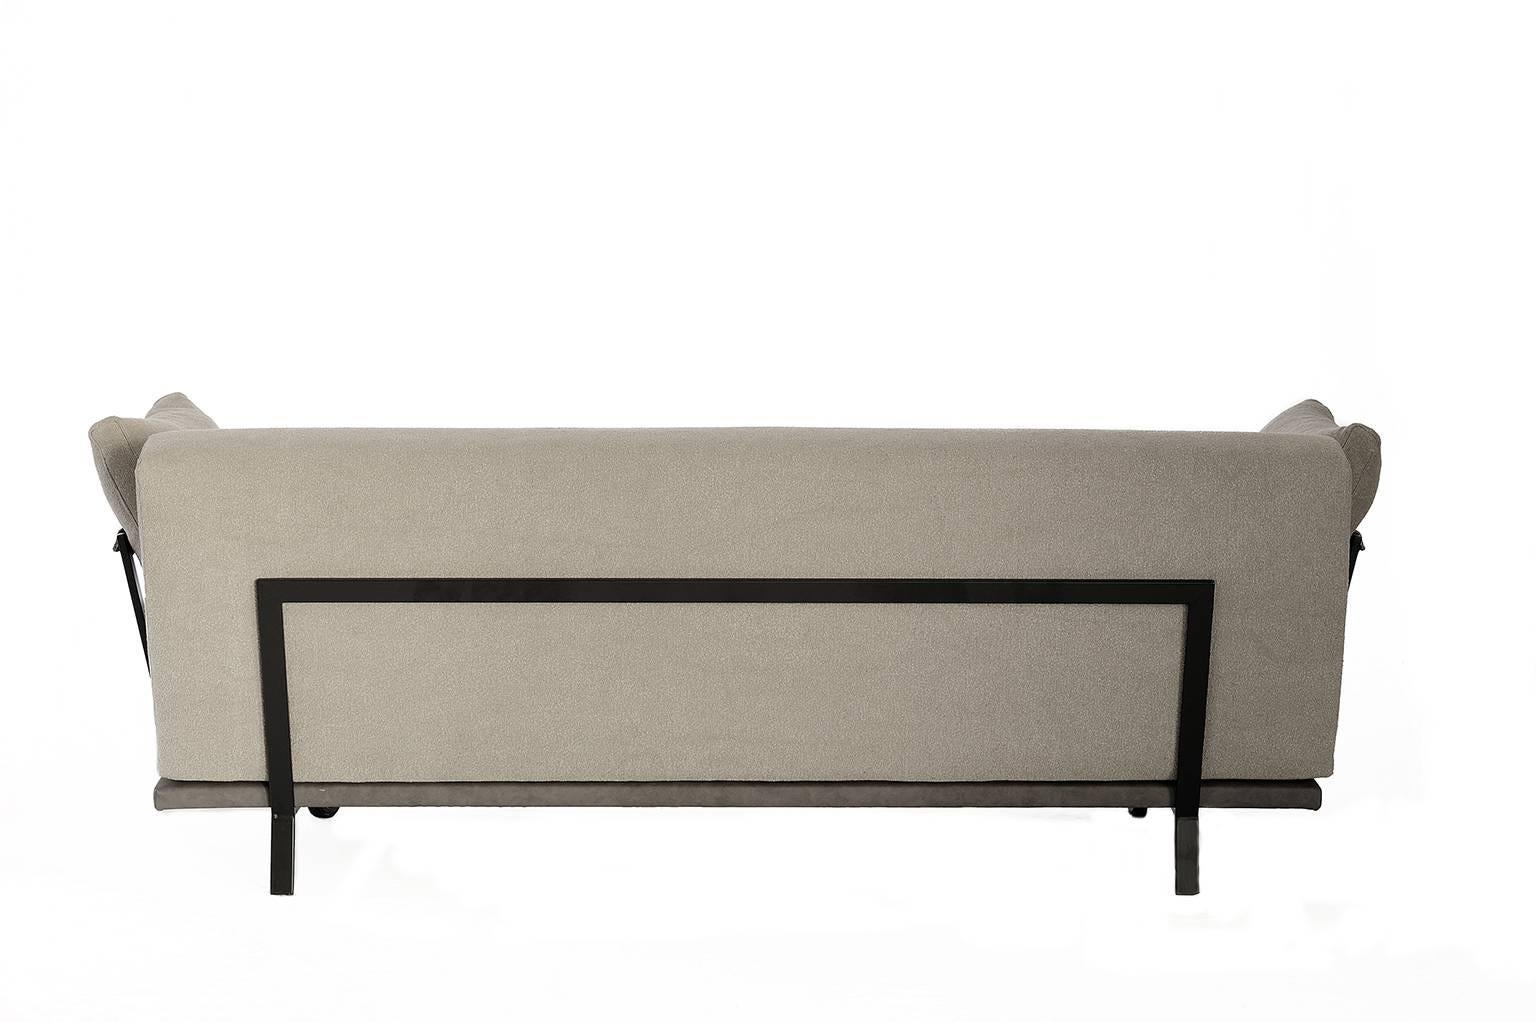 Other Contemporary Design Wood and Tubular Iron Sofa For Sale